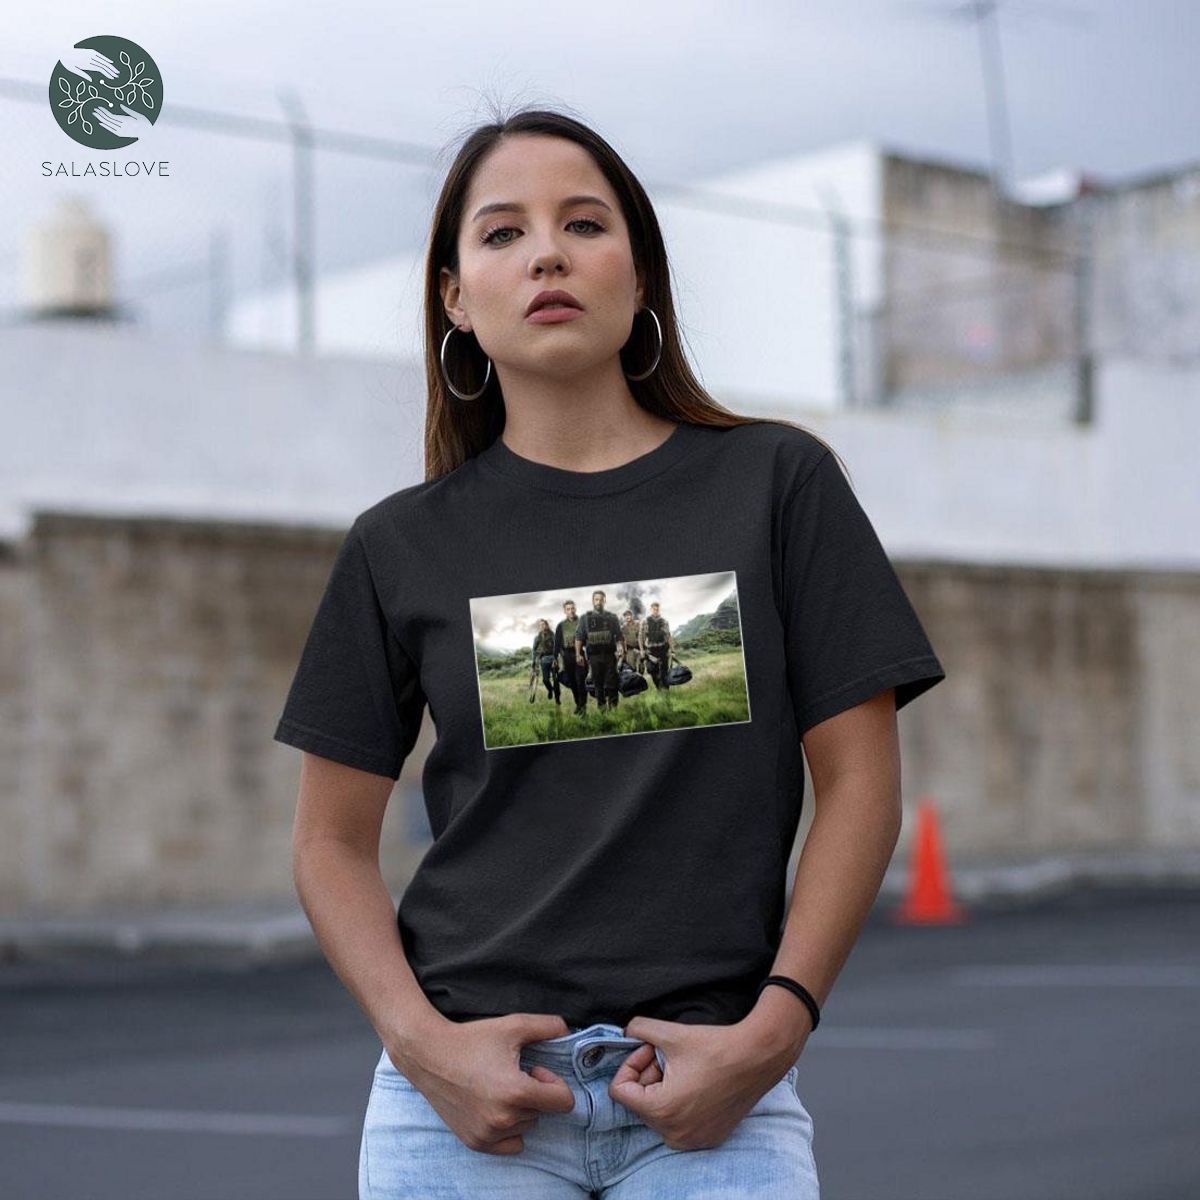 Triple Frontier Rumble In The Jungle T-shirt